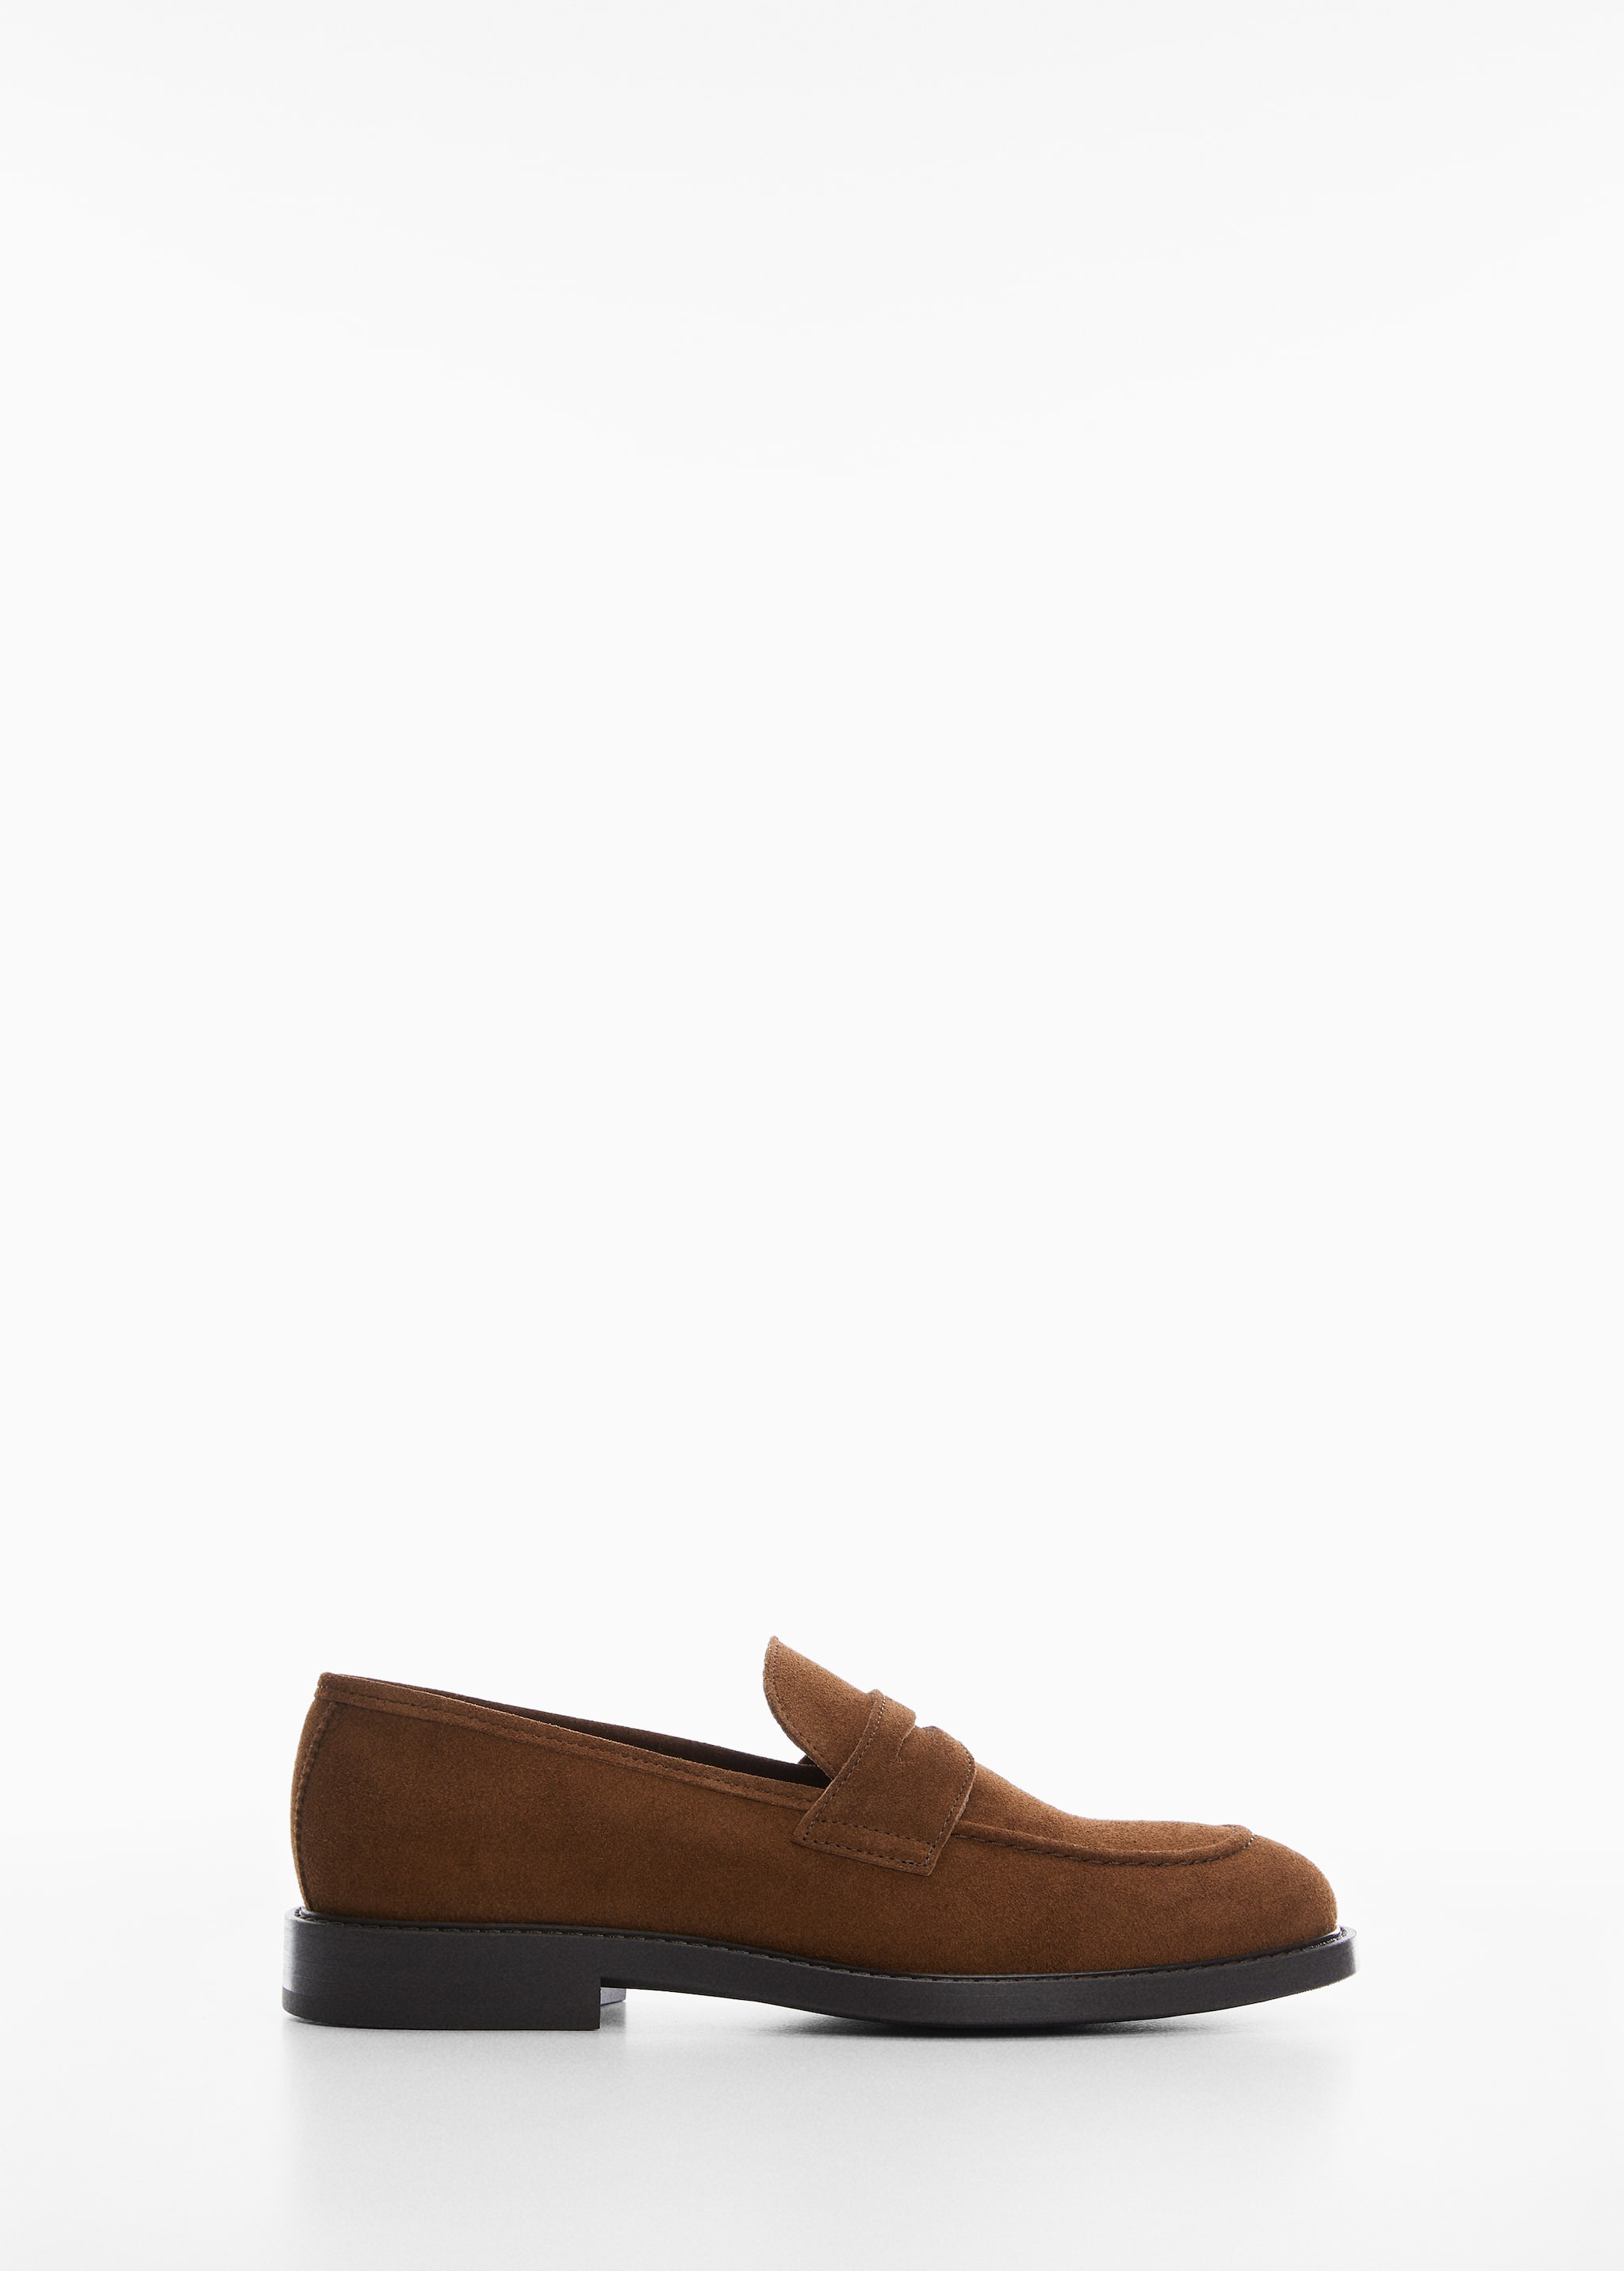 Suede leather loafers - Article without model